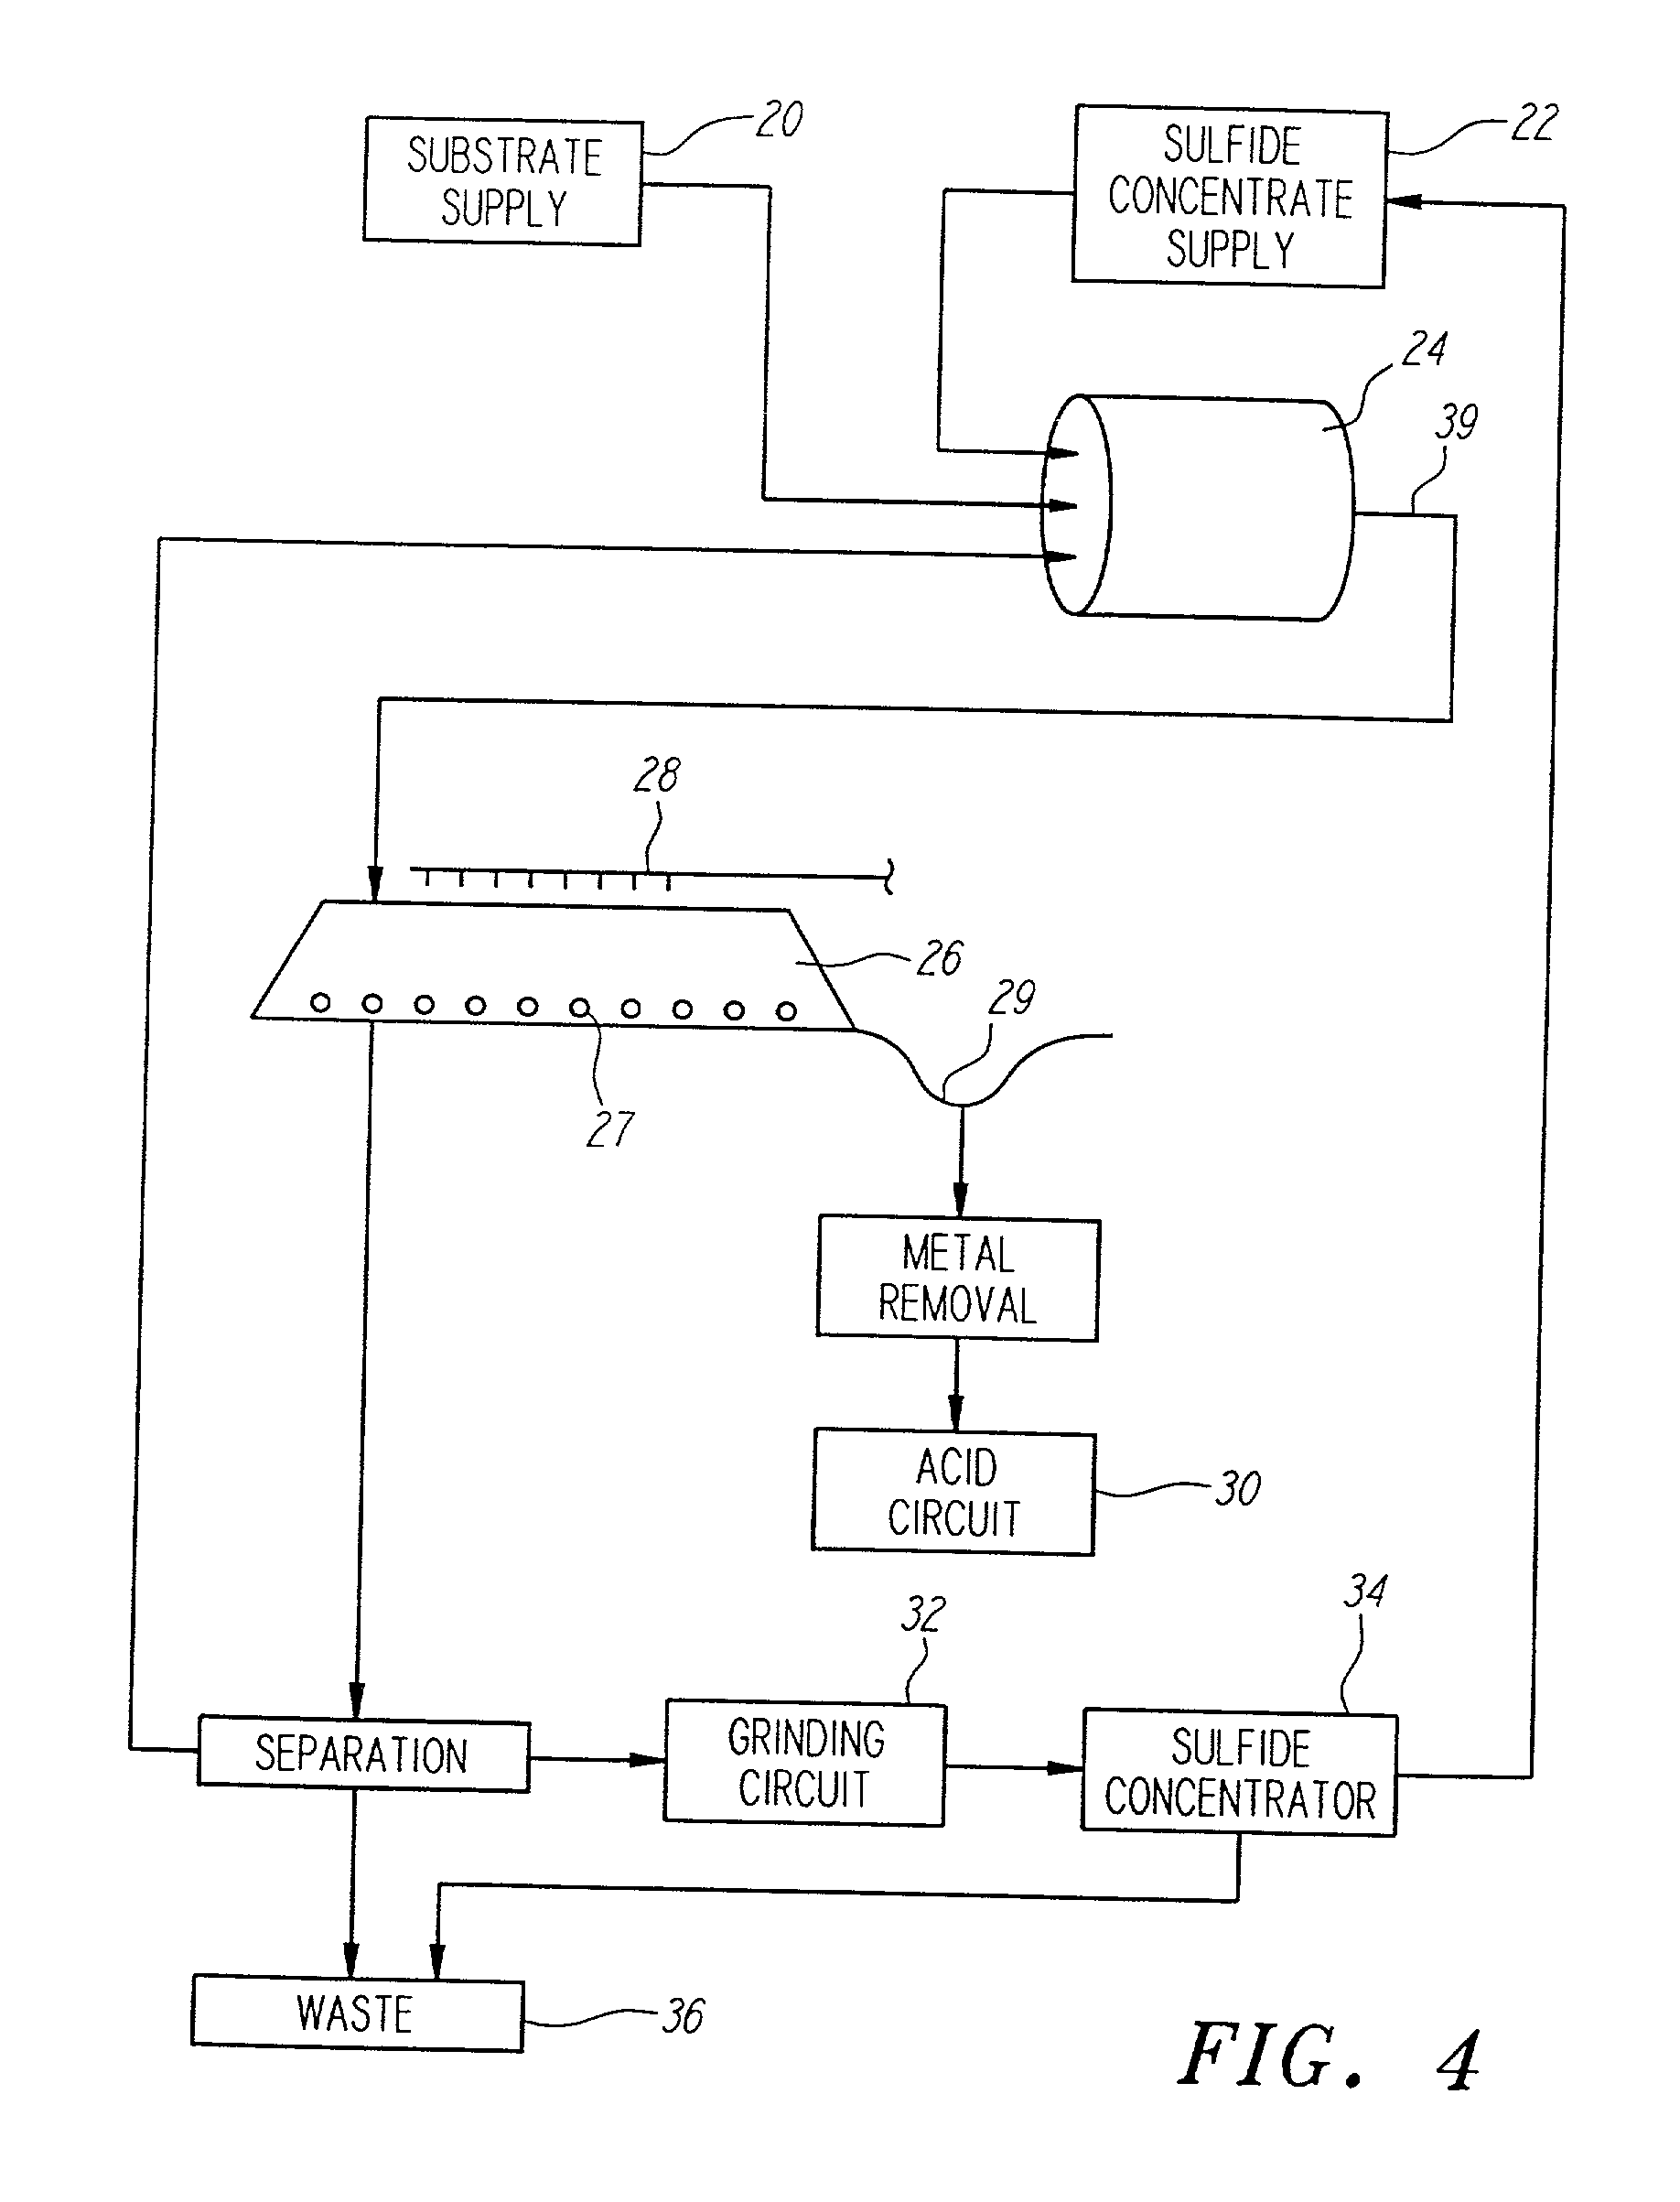 Method of biotreatment for solid materials in a nonstirred surface bioreactor